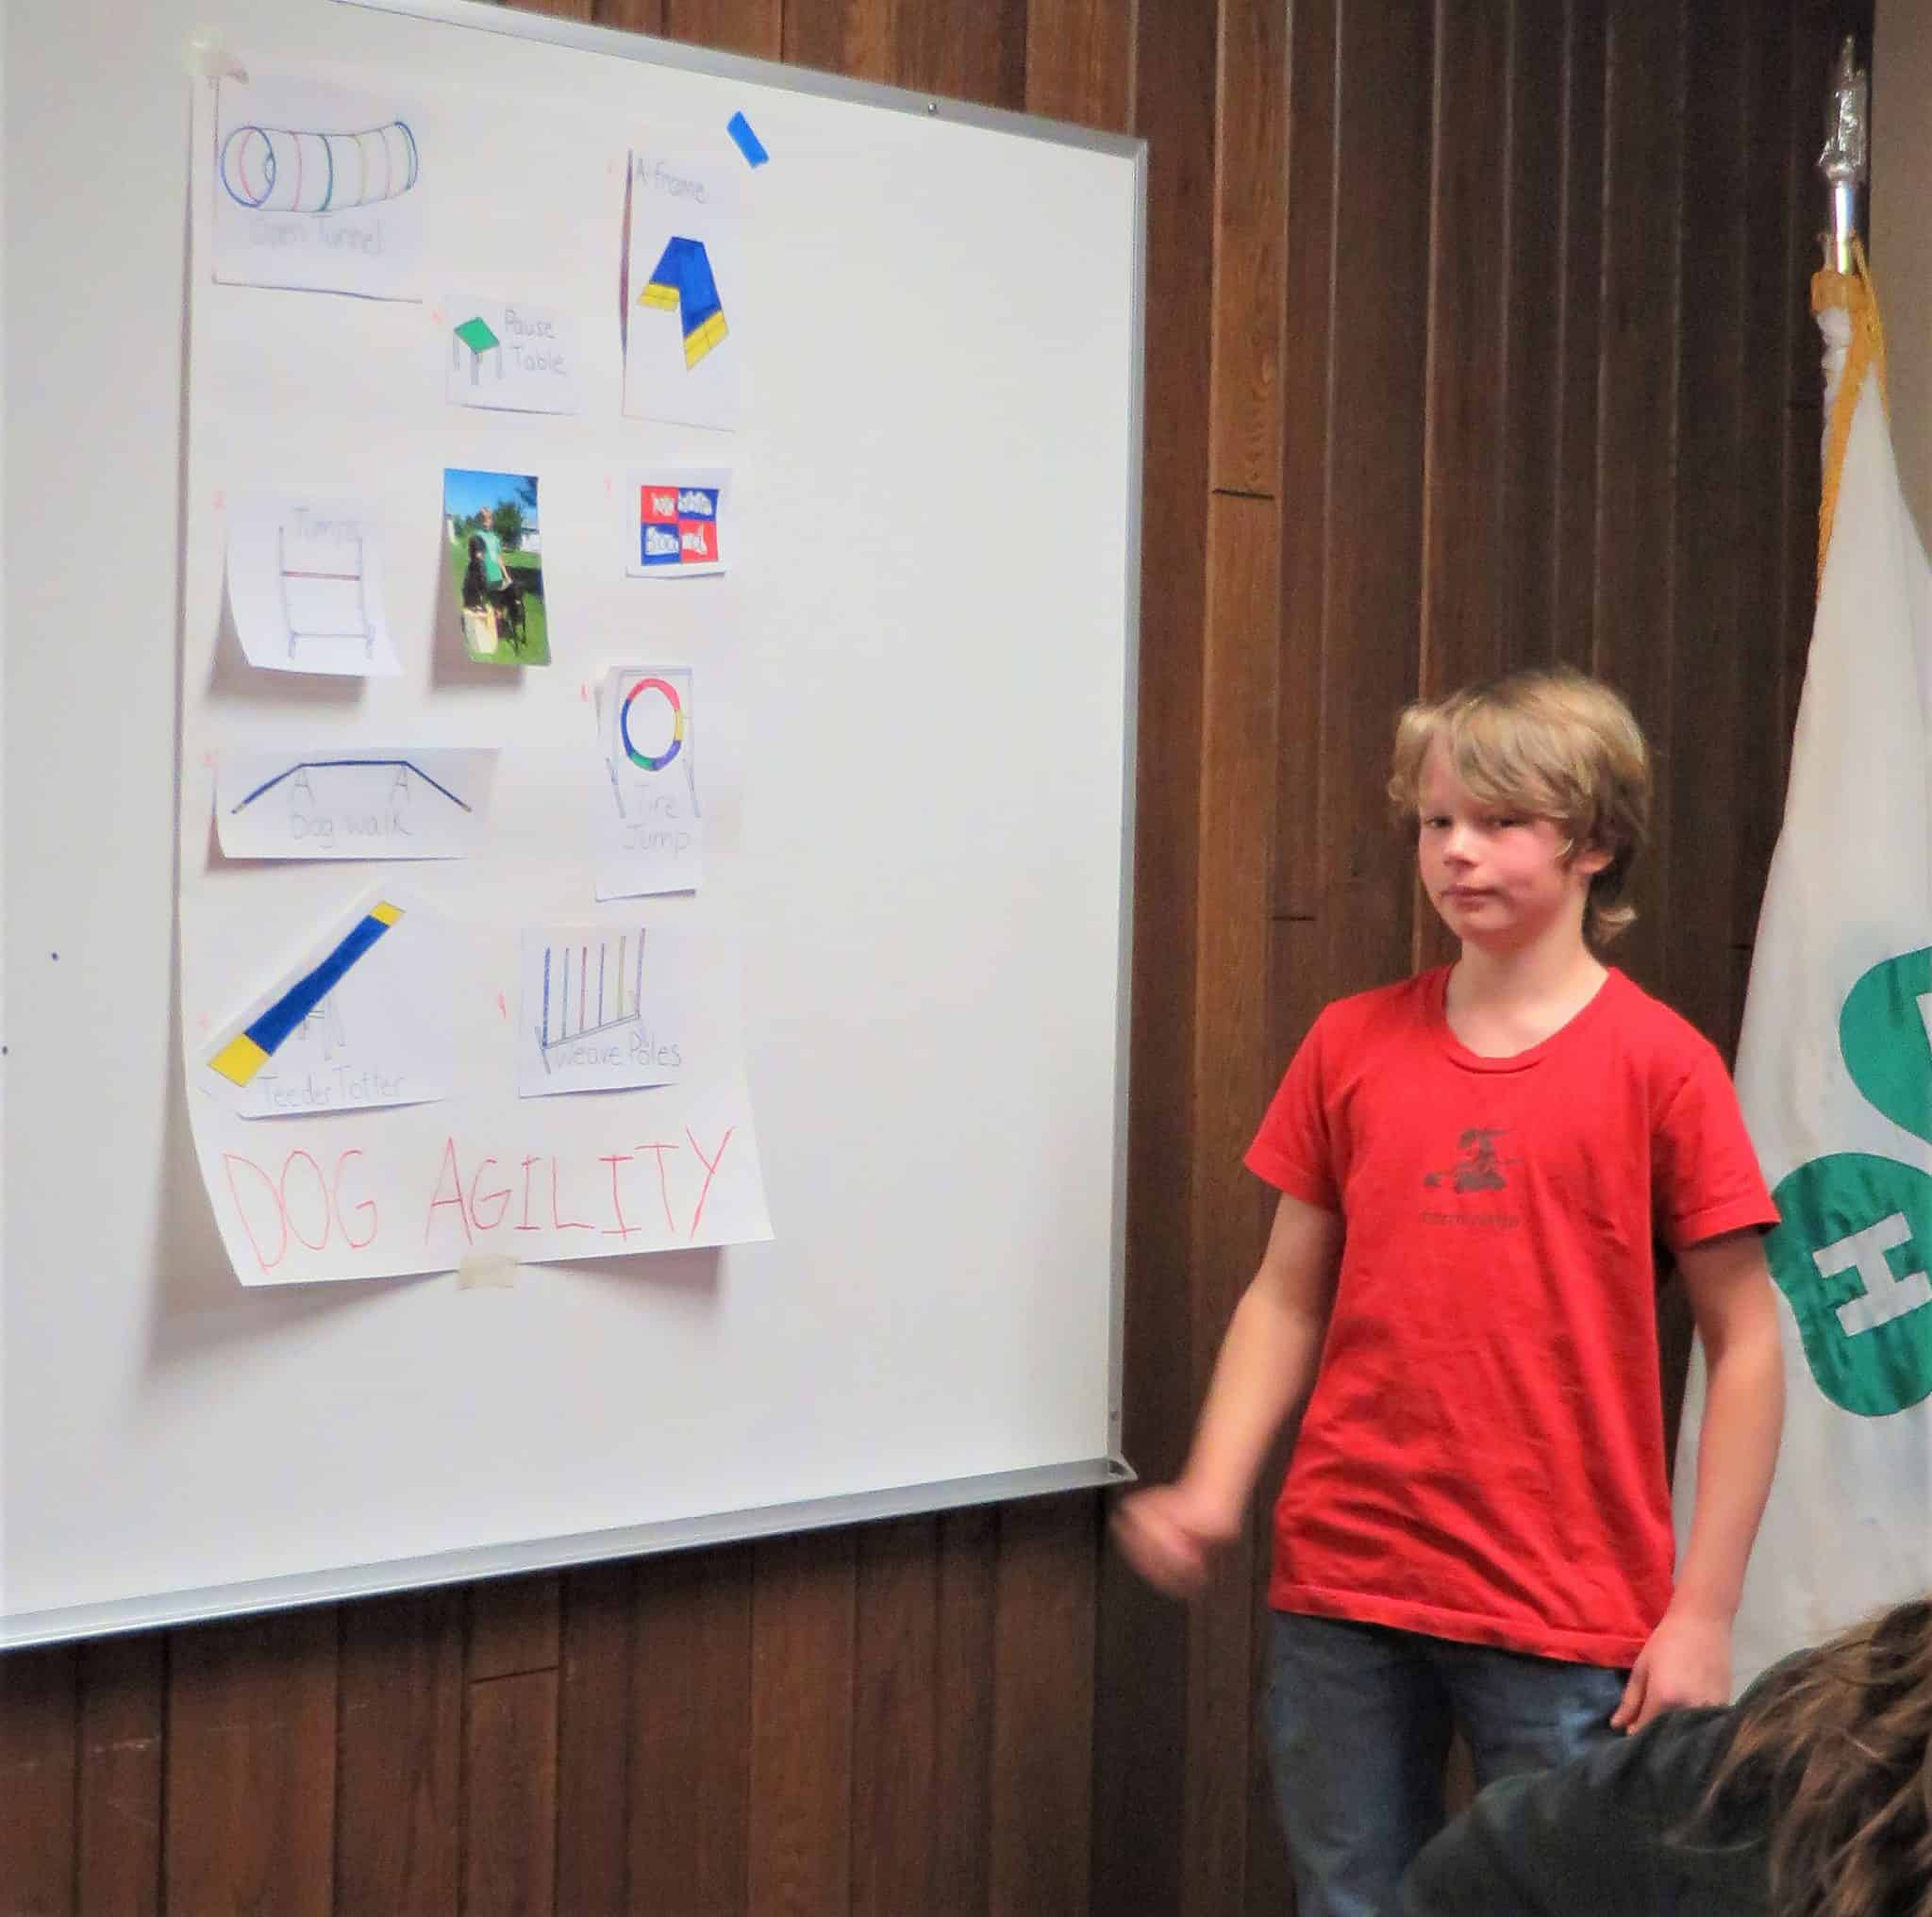 Oneida County Youth Demonstration Festival to provide public speaking opportunity